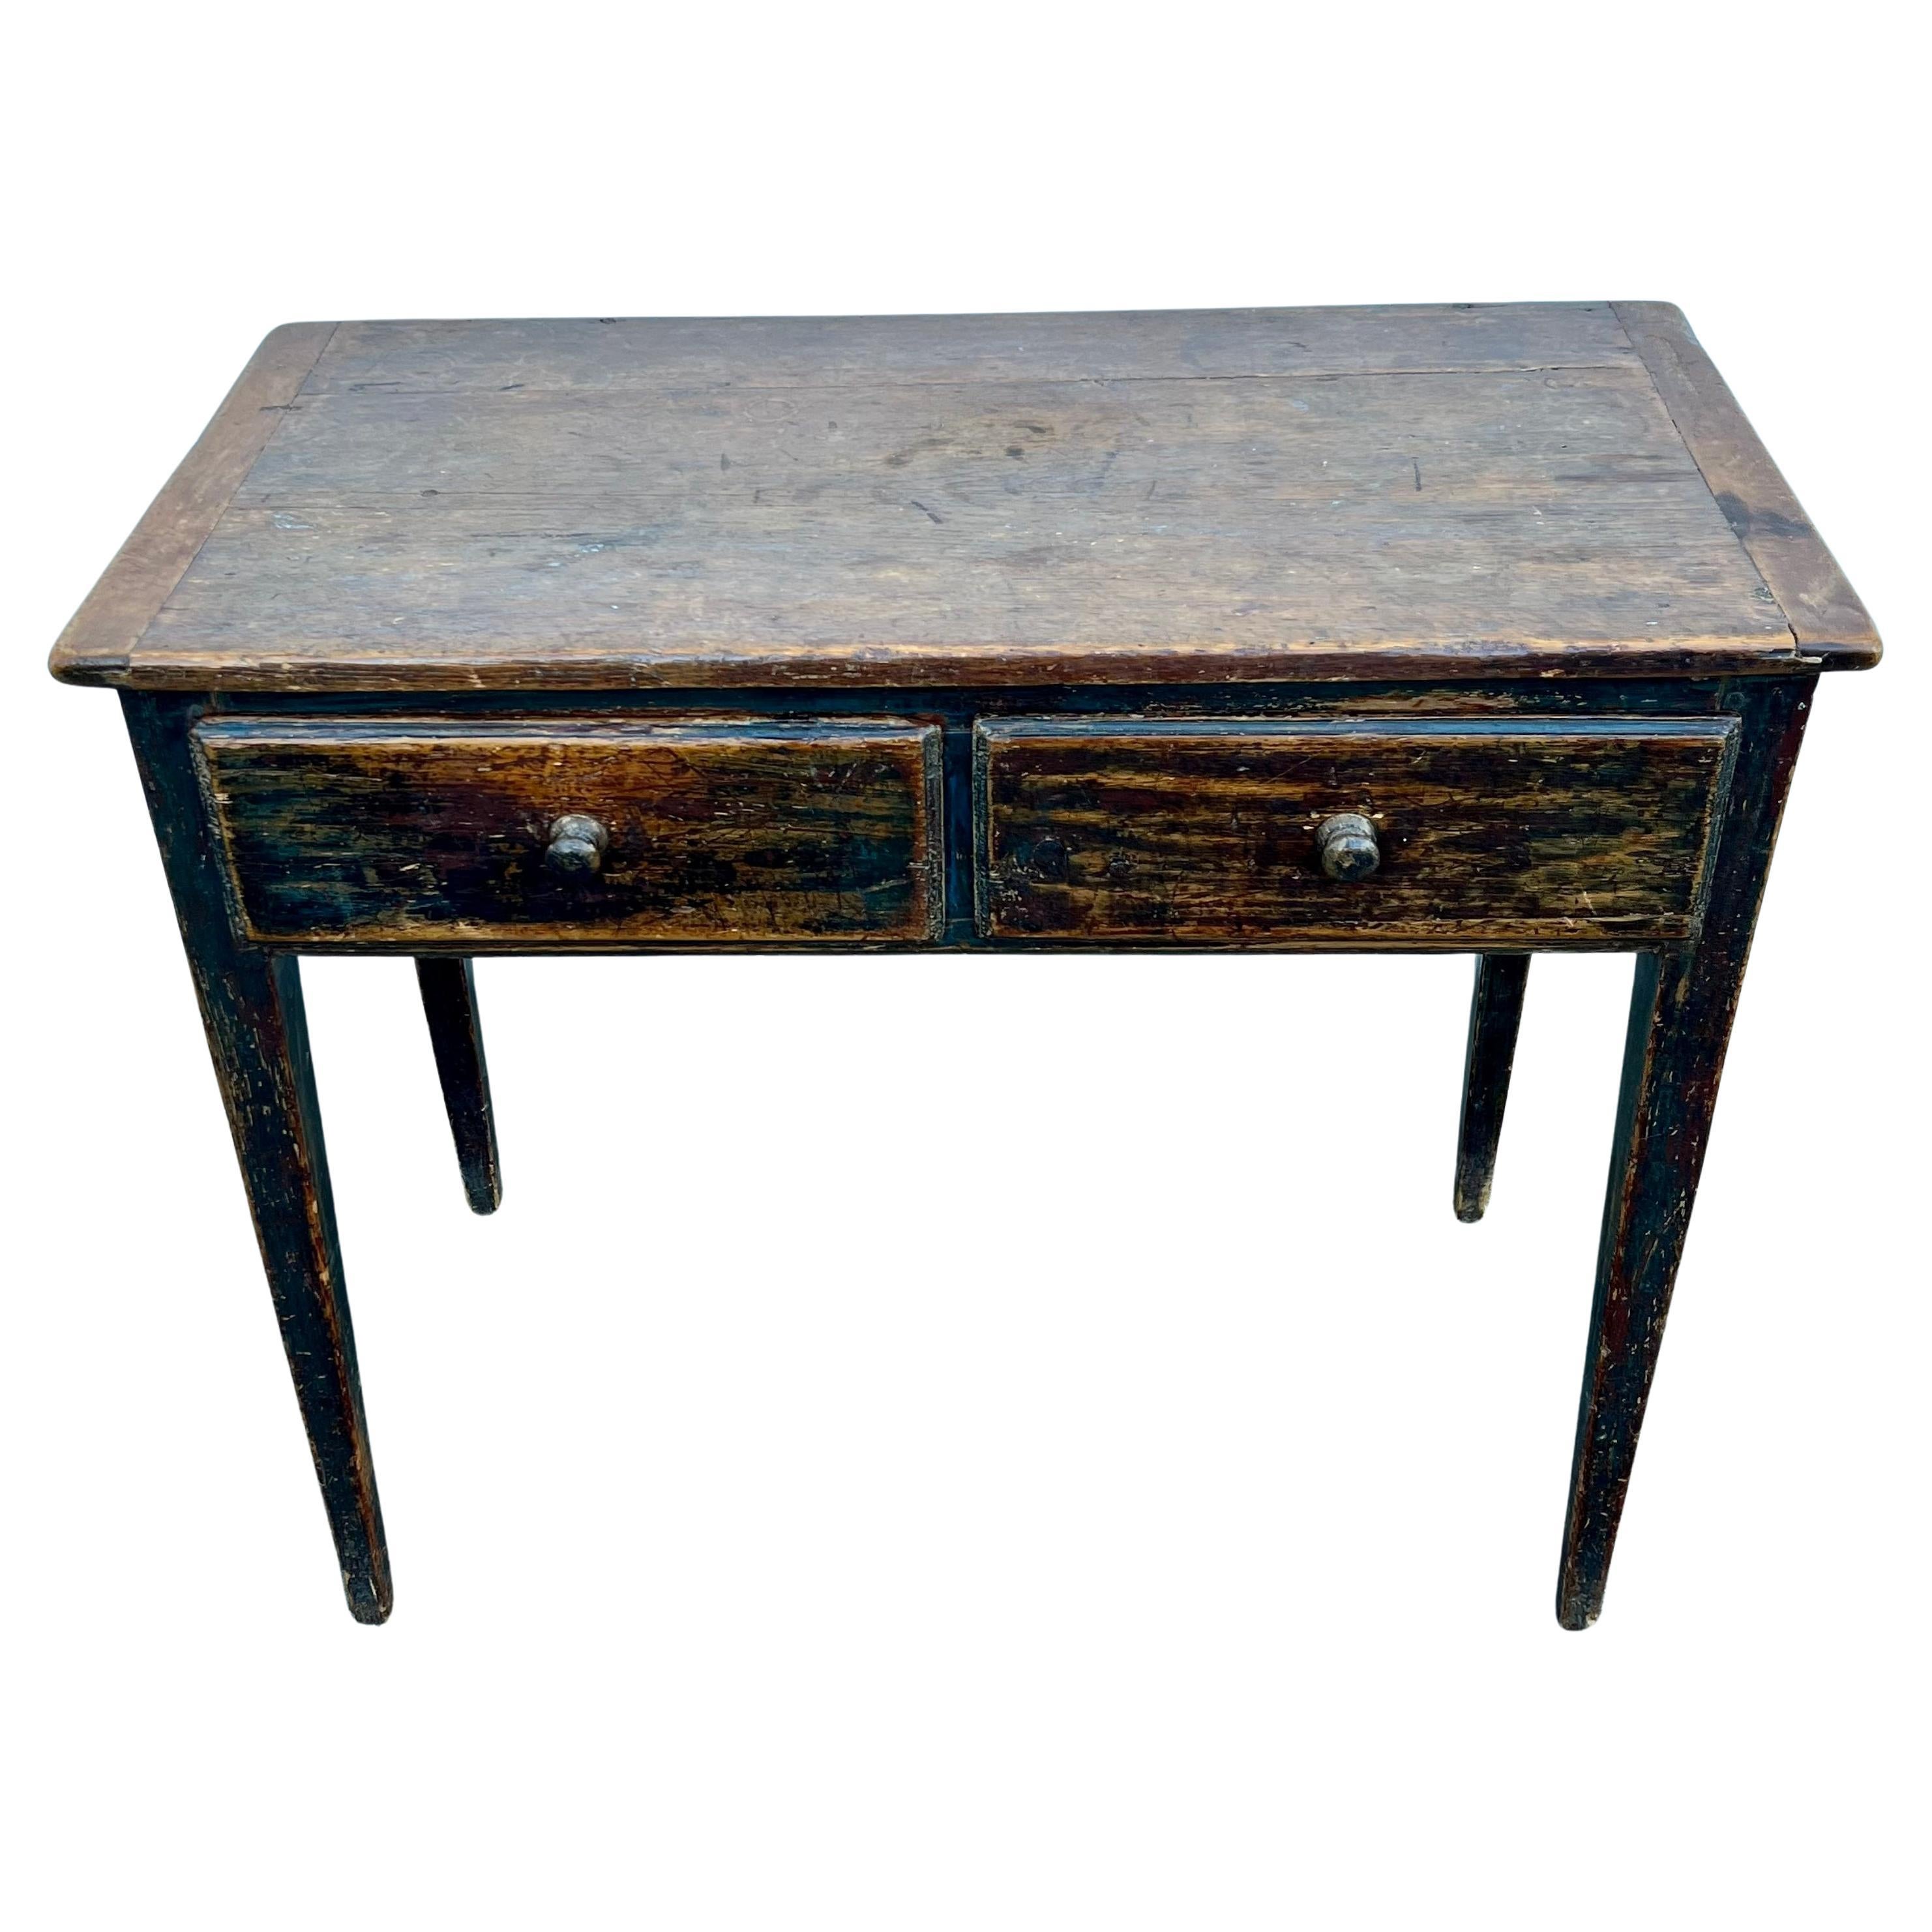 19th Century Pine Console Table In Original Paints